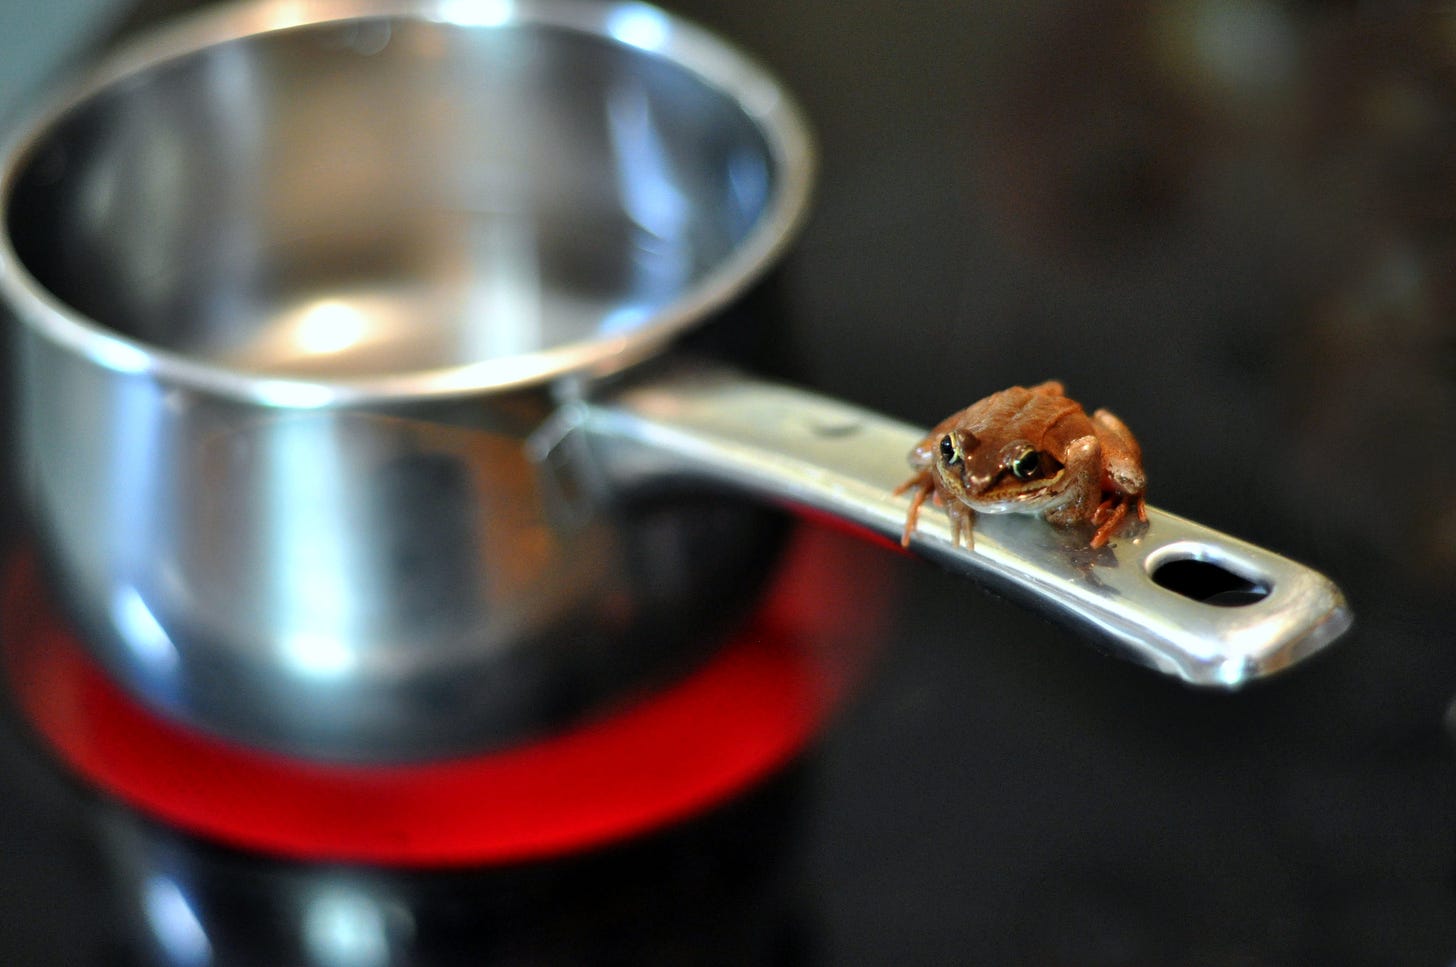 Boiling frog - Wikipedia